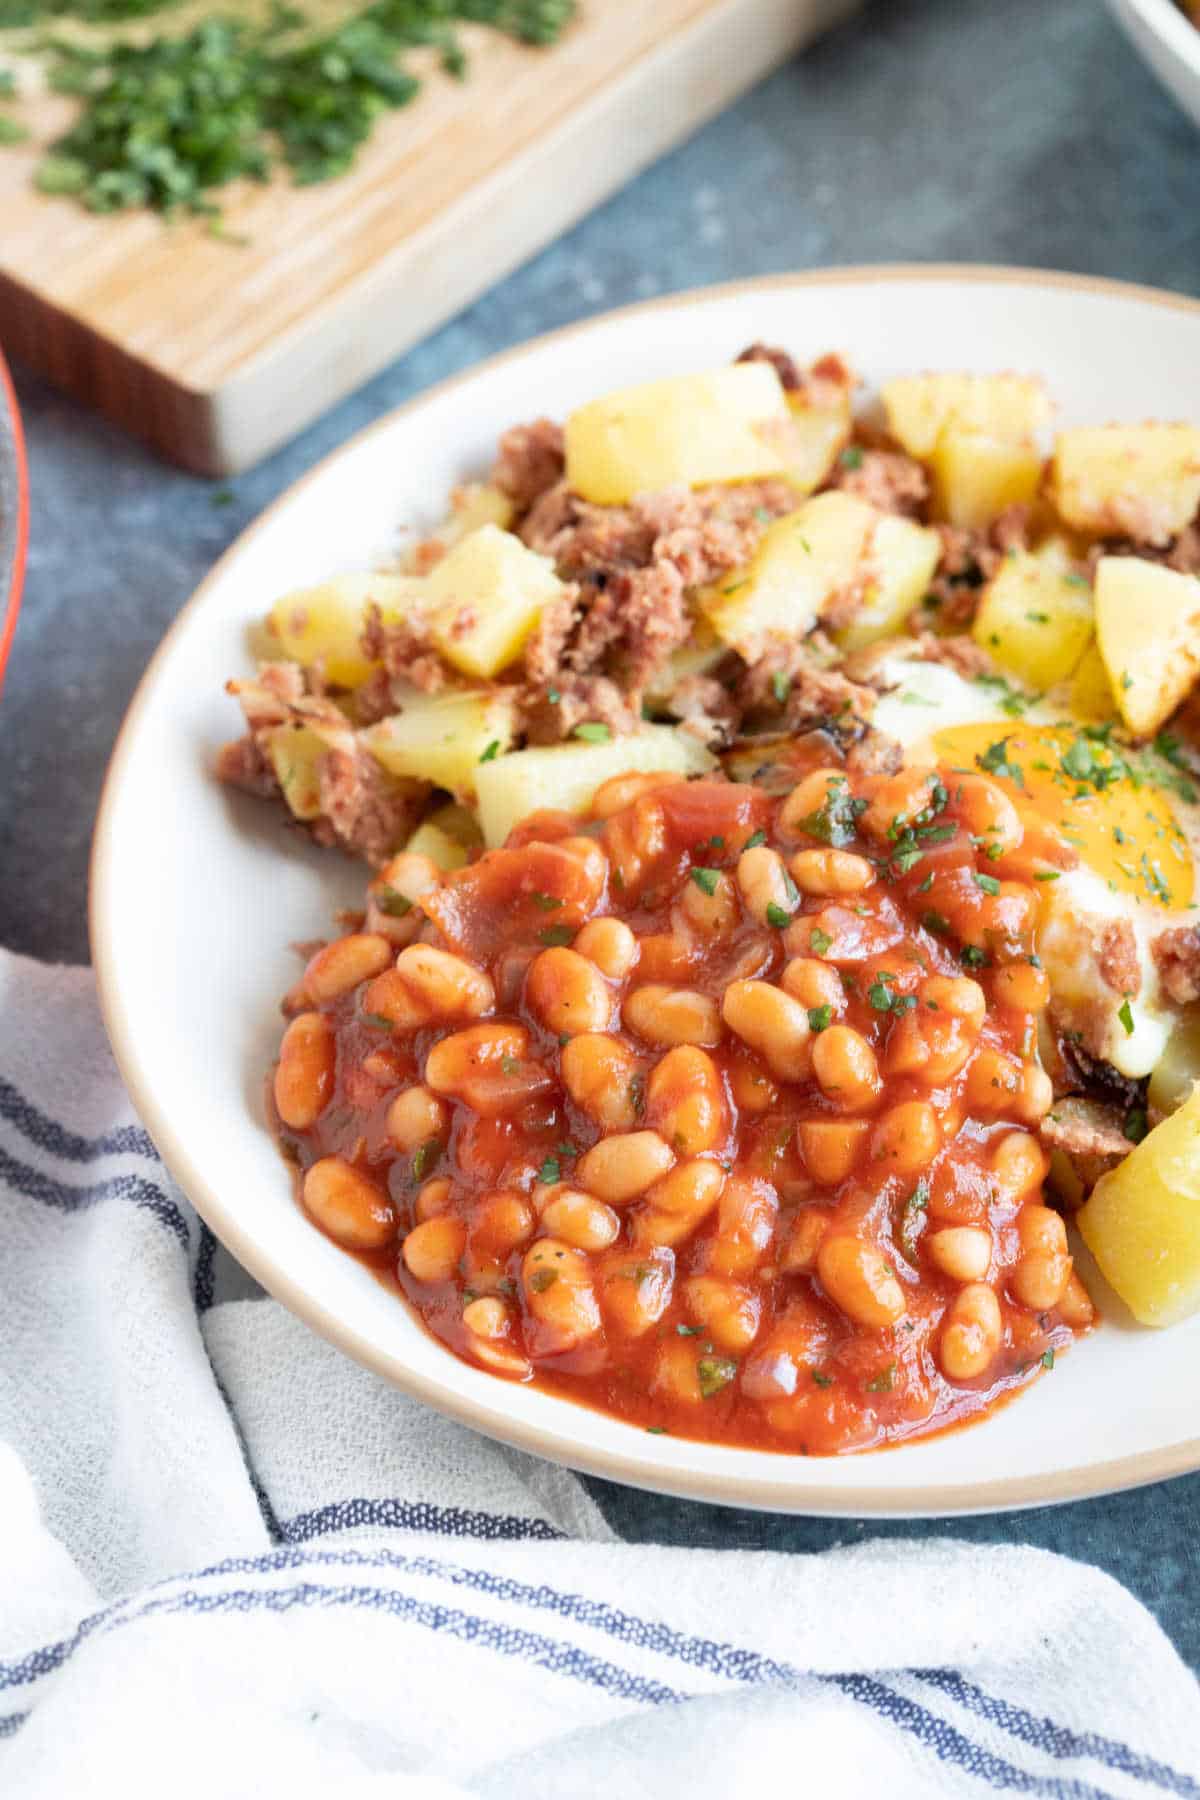 A plate of baked beans, fried egg, and potatoes.